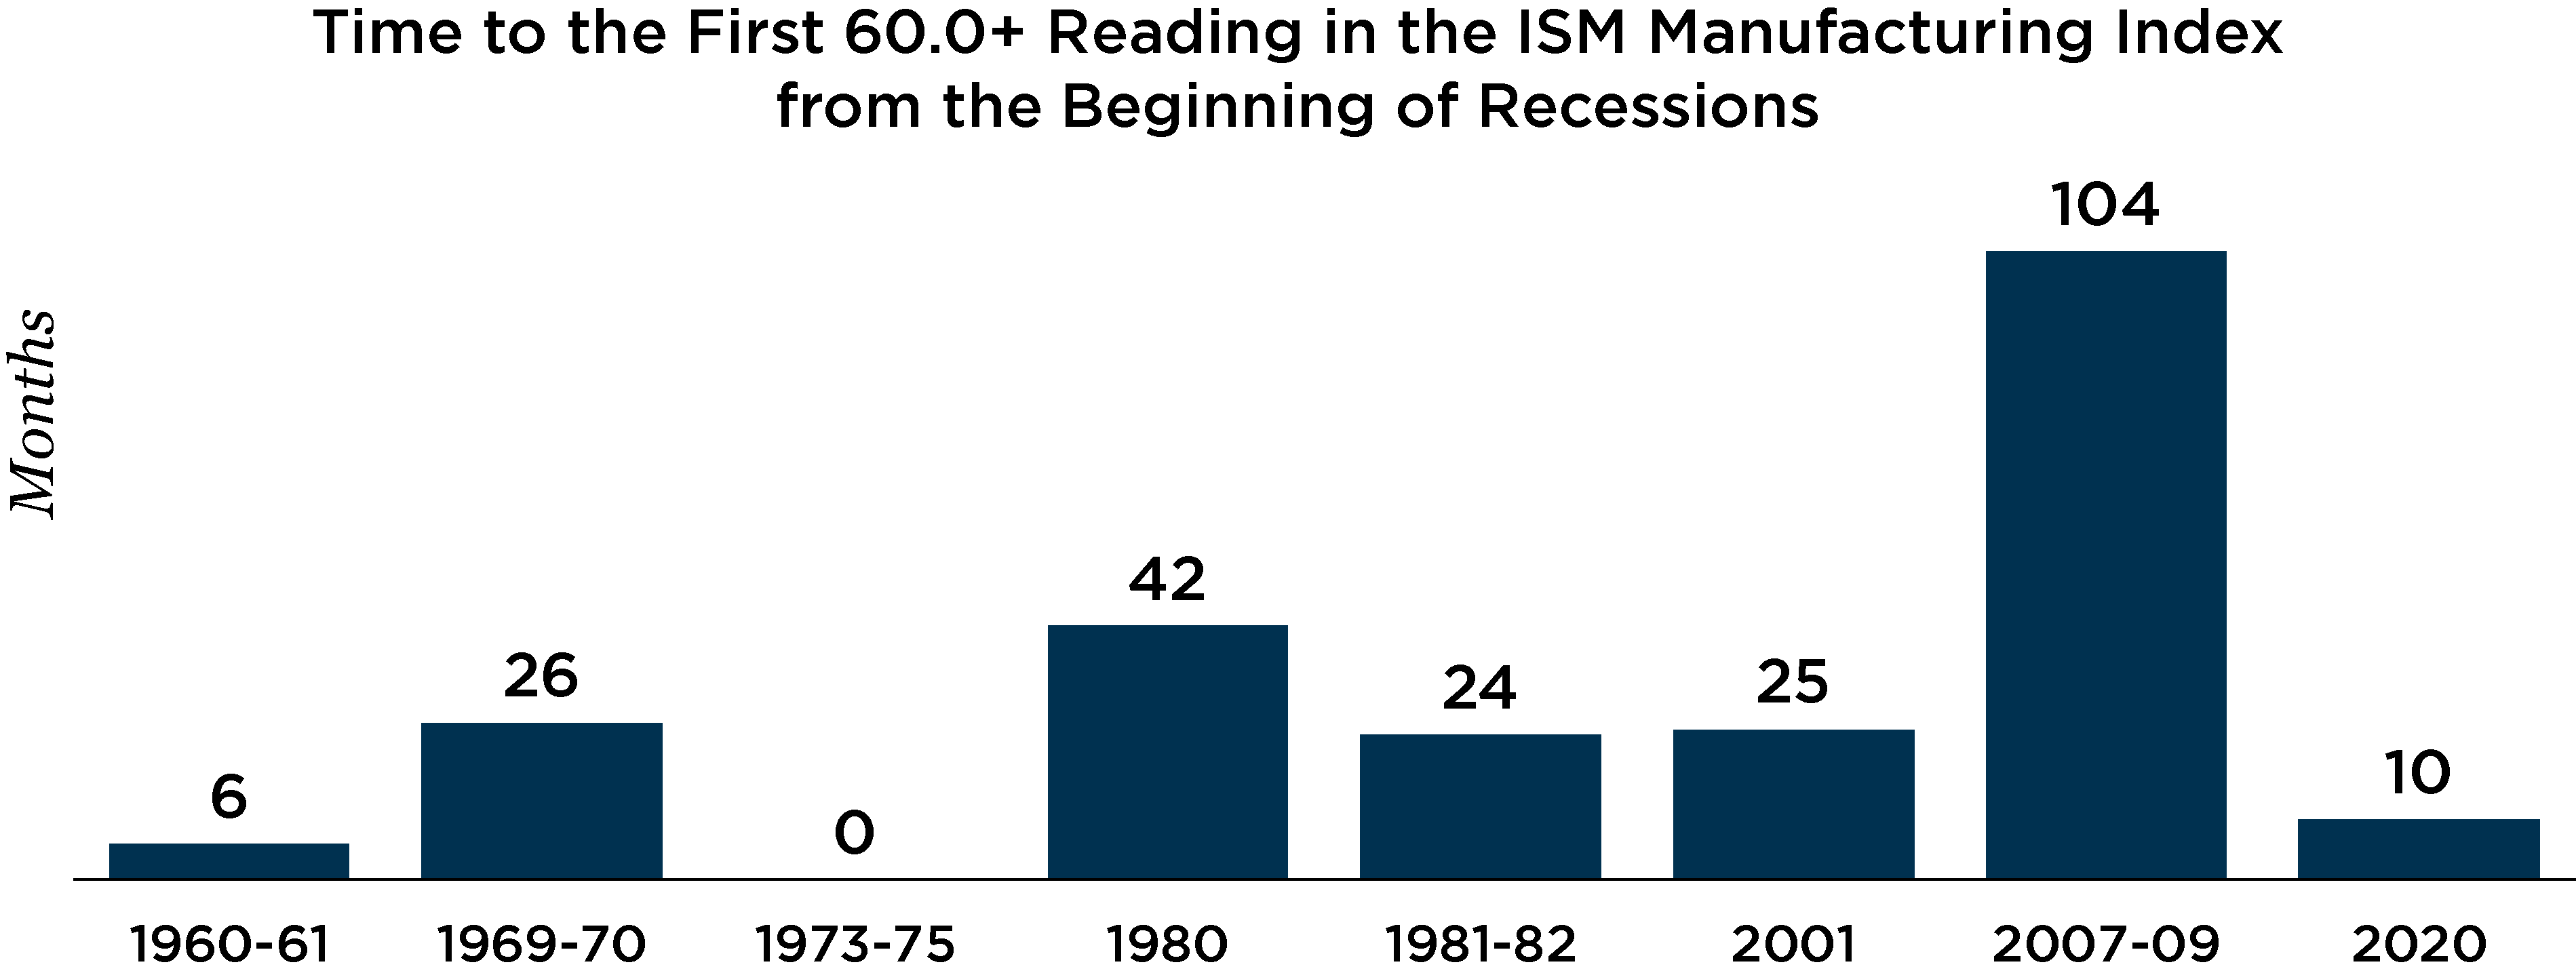 chart depicting Time to the First 60.0+ Reading in the ISM Manufacturing Index from Beginning of Recessions